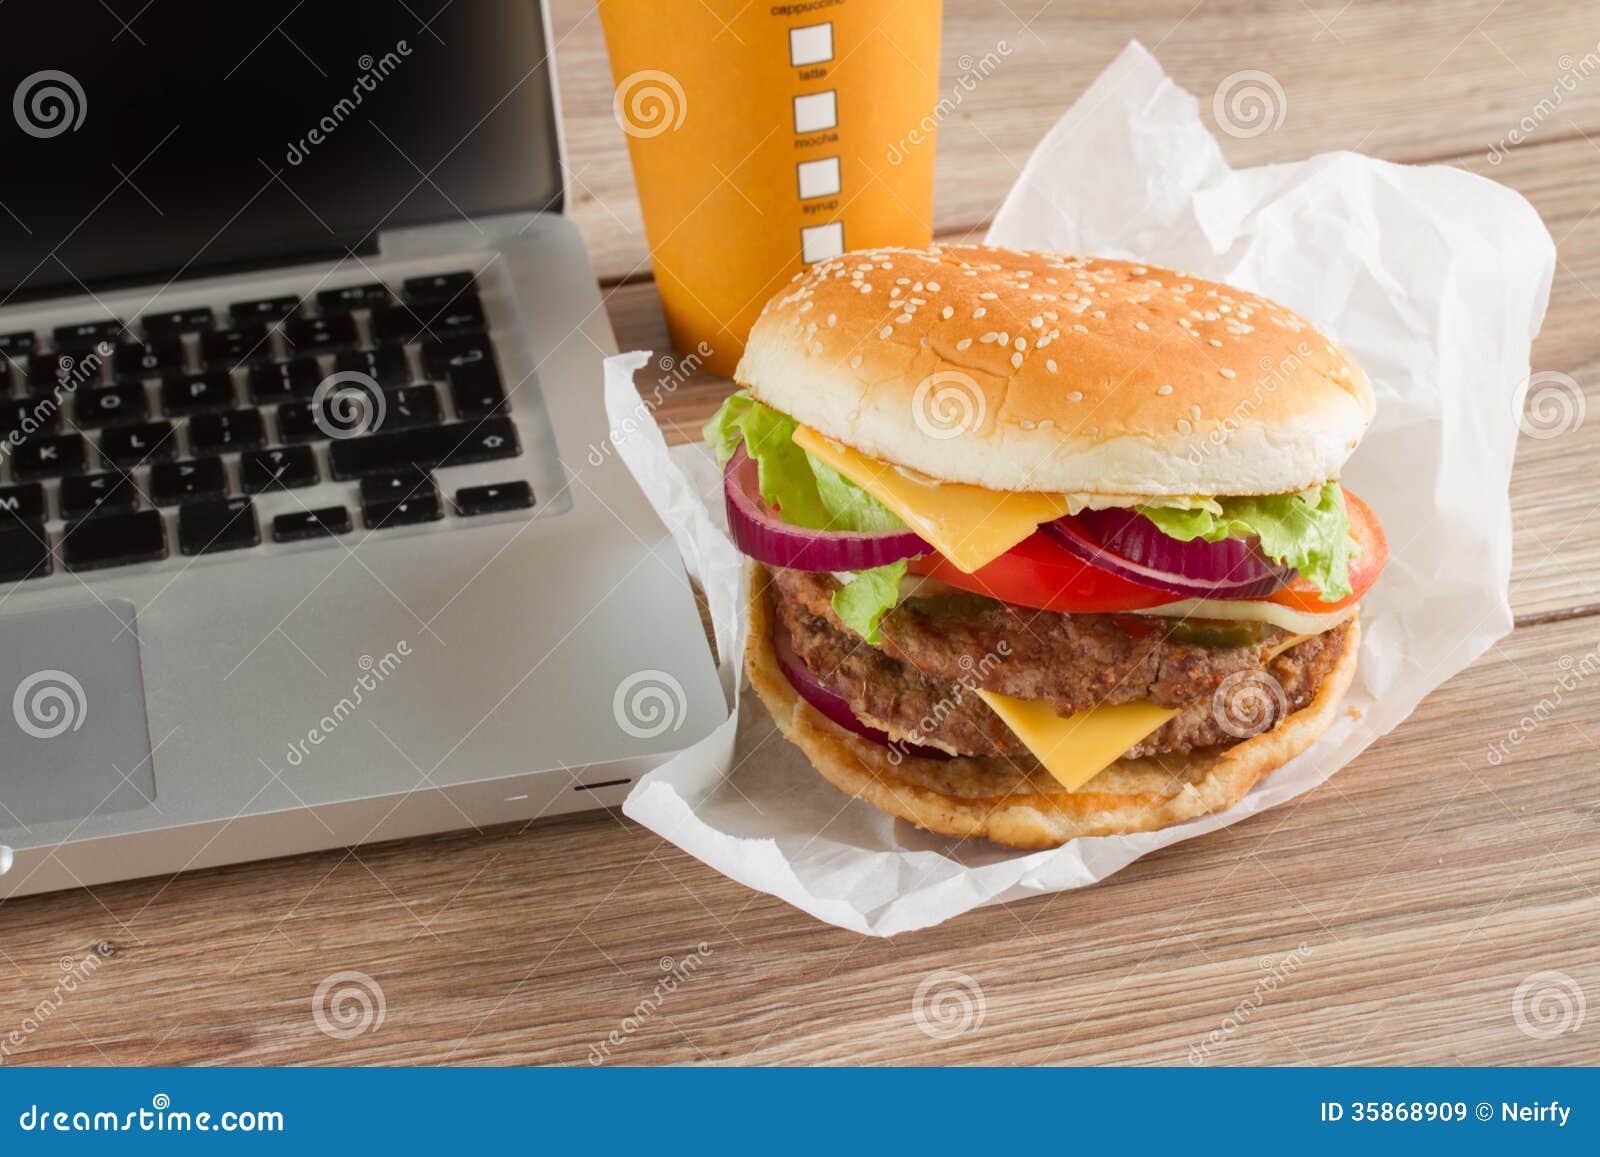 Eating At Work Place Near Laptop Royalty Free Stock Images ...